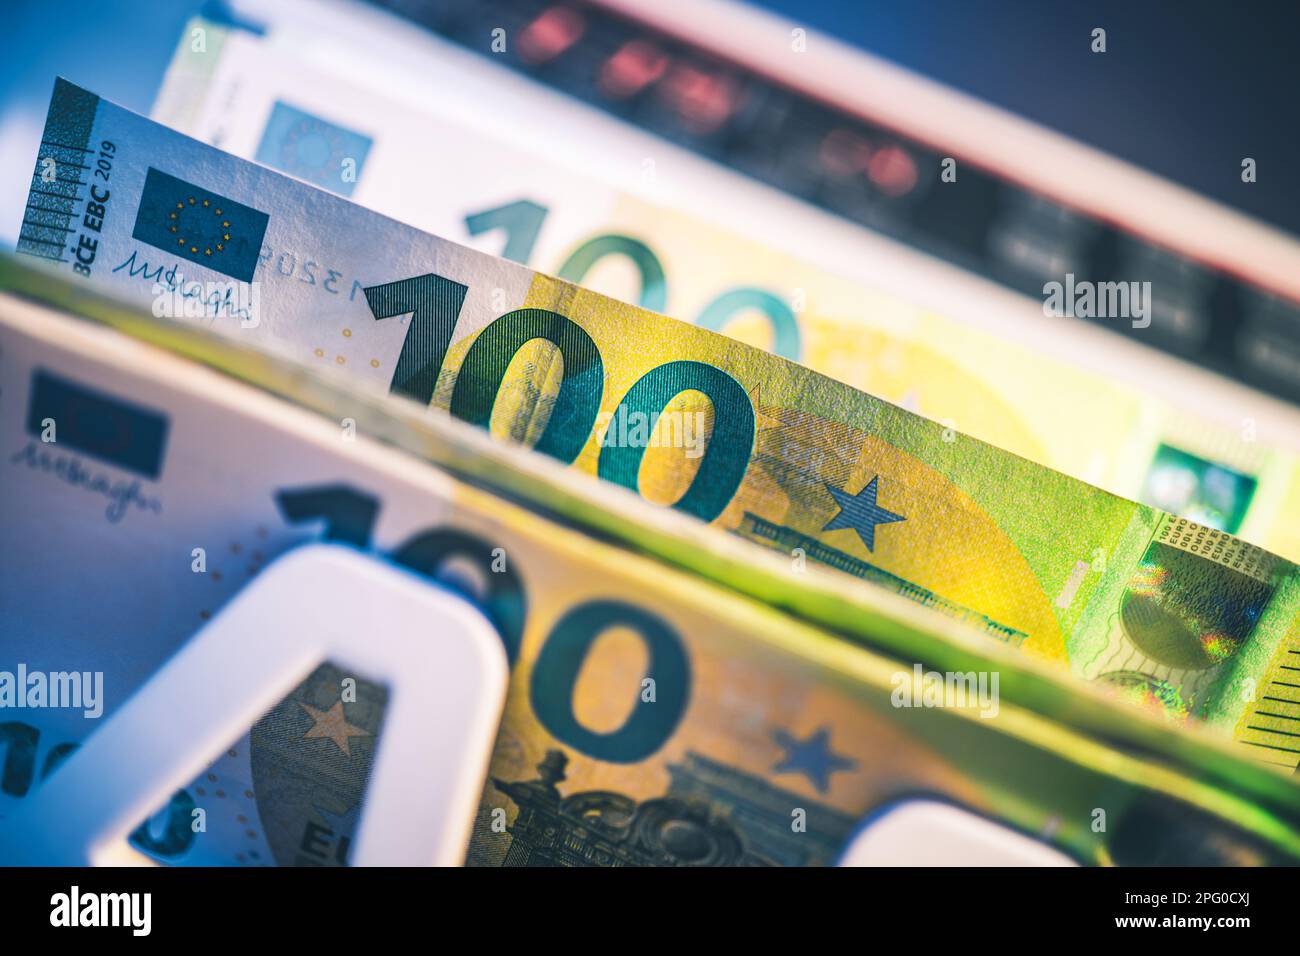 European Euro Banknotes Inside Counting Machine Close Up. Finance Industry Theme. Stock Photo